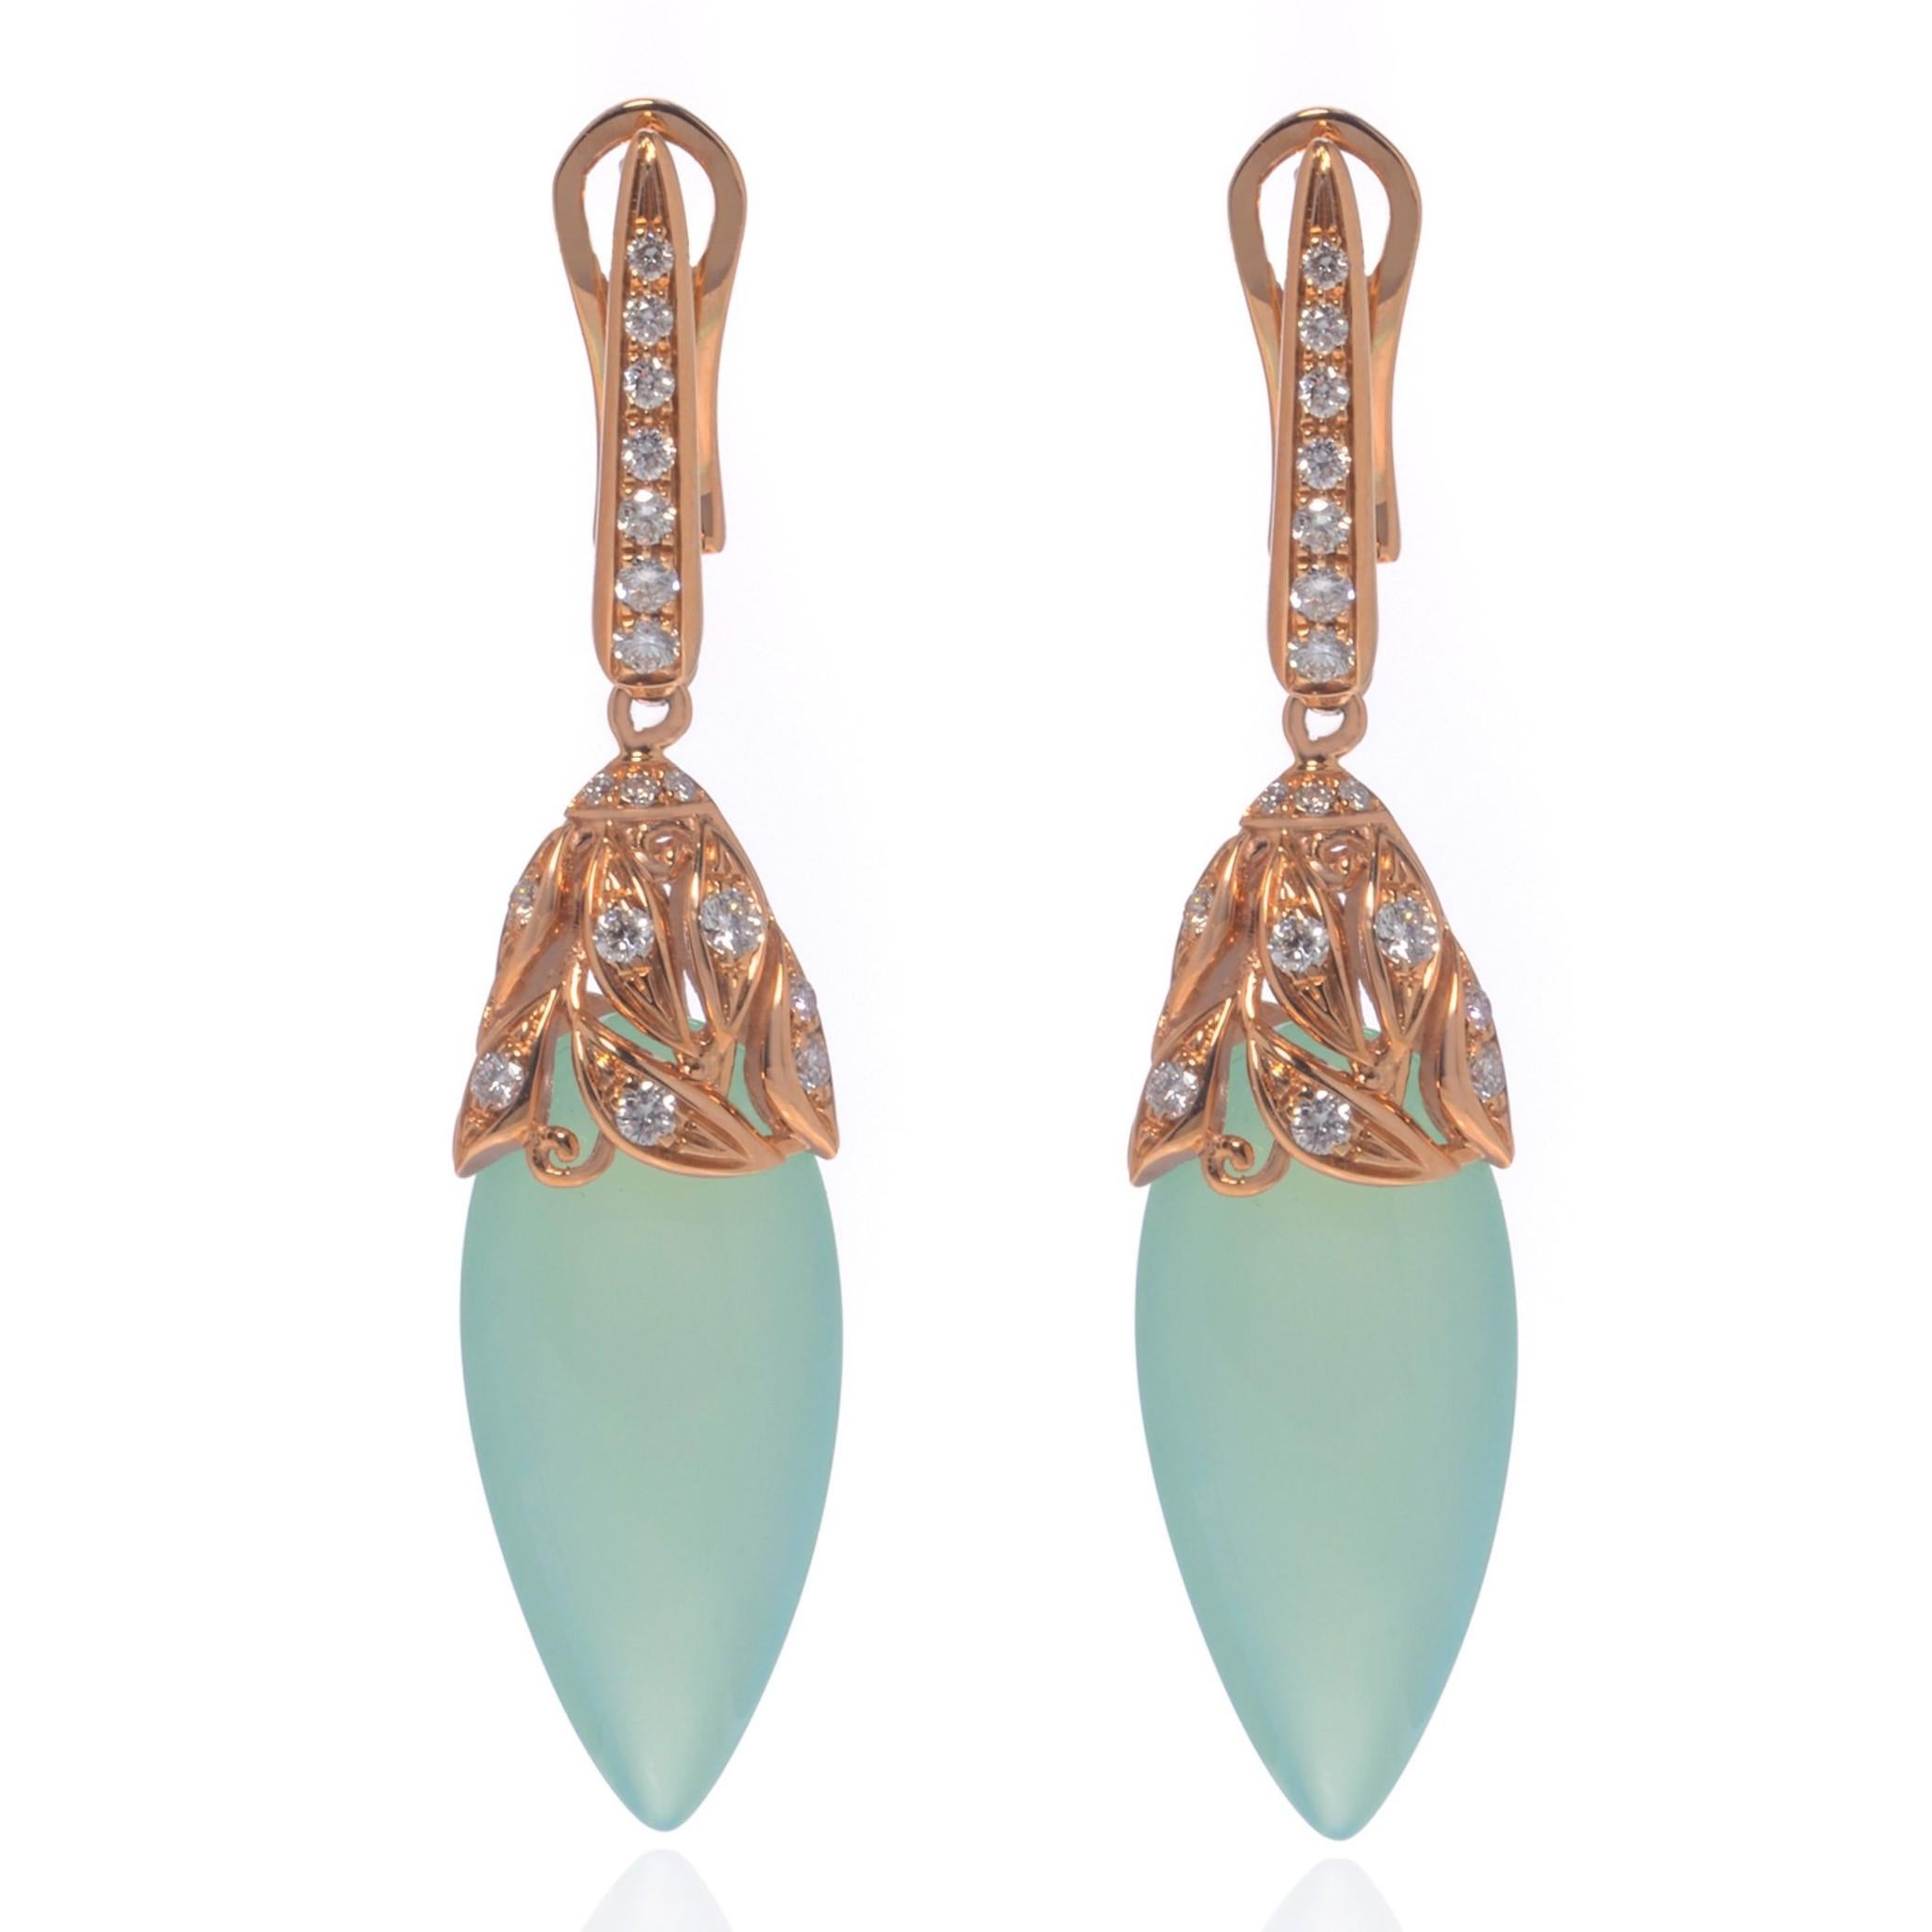 Chalcedony and diamond drop earrings of classic contemporary styling. The earrings are crafted in 18k yellow gold and set with a combination of Chalcedony and round brilliant cut diamonds. Diamonds are pave set and have a total weight of 0.45.